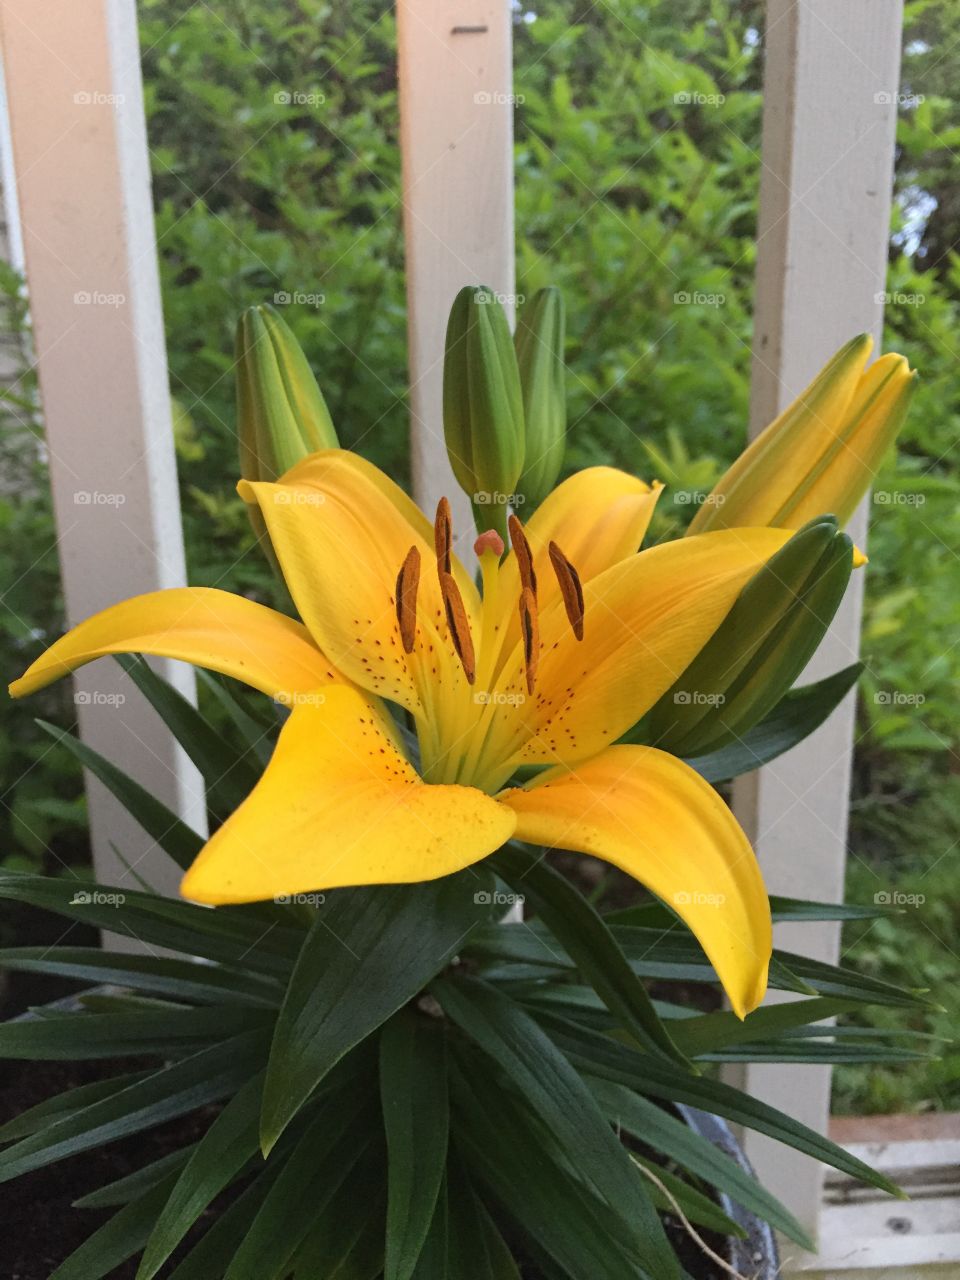 Outstanding lily